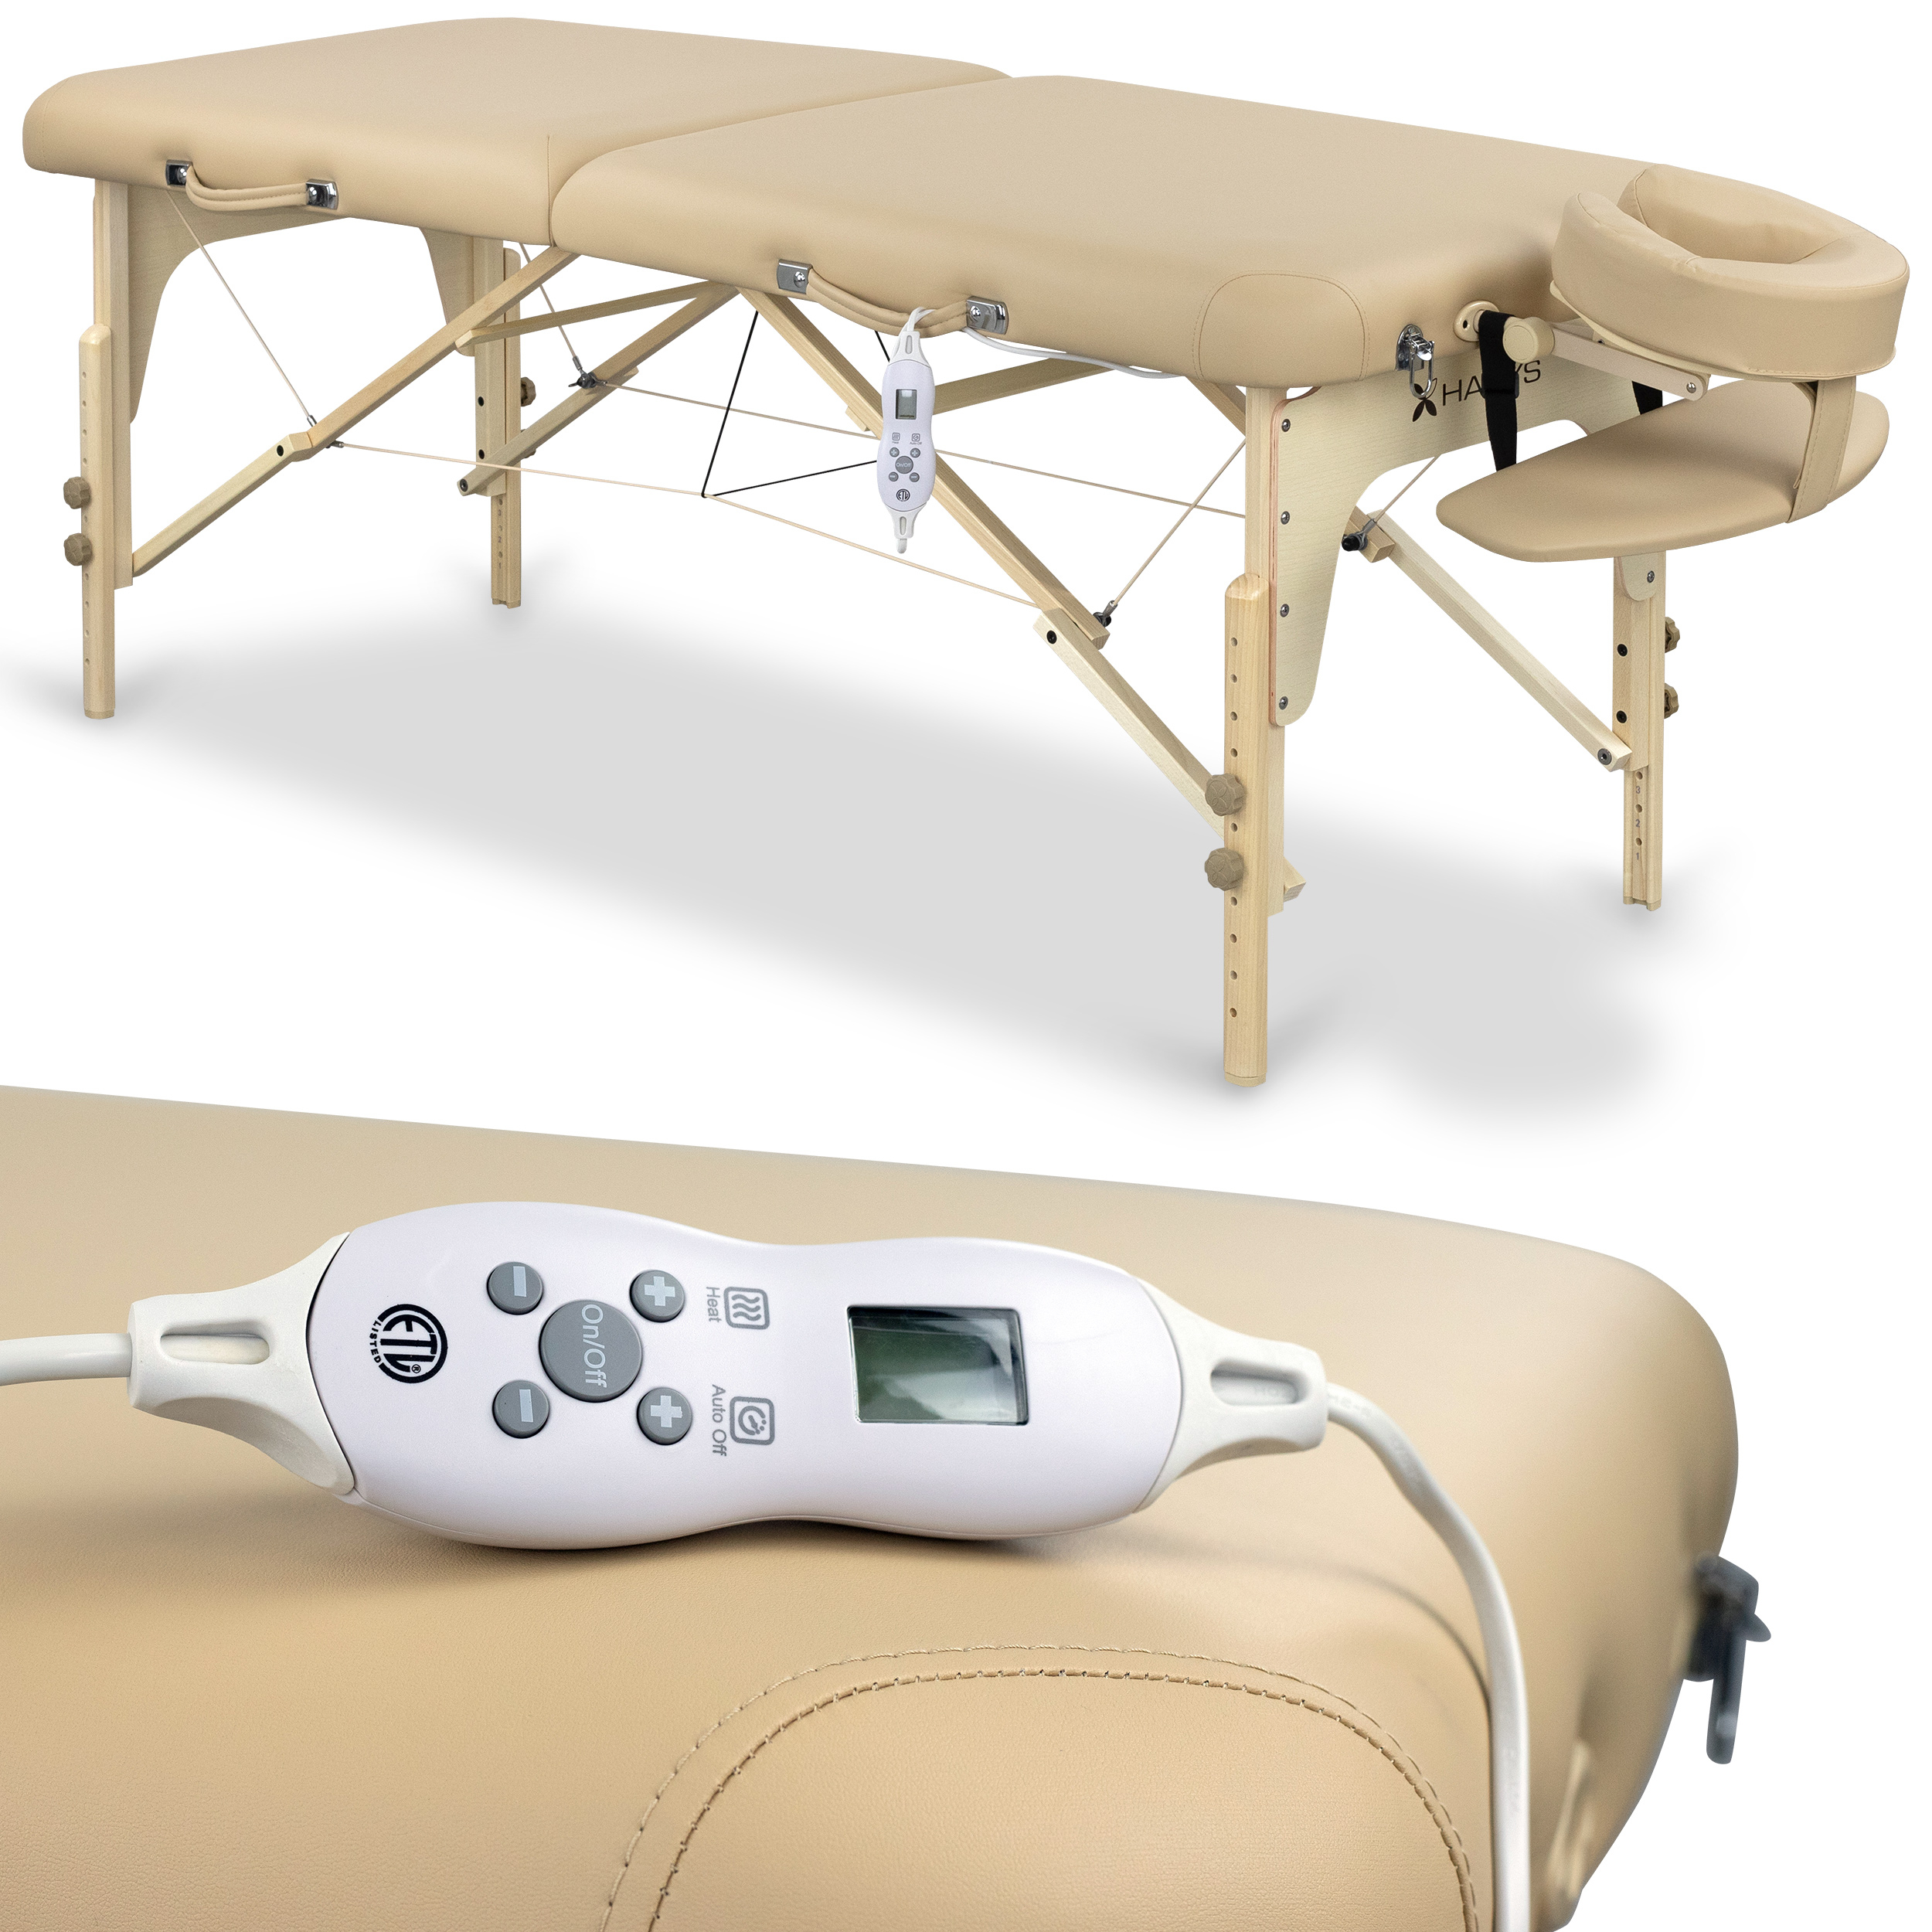 eng_pl_Massage-table-Therma-Top-light-wood-70-Soft-Touch-K607-Beige-2074_14